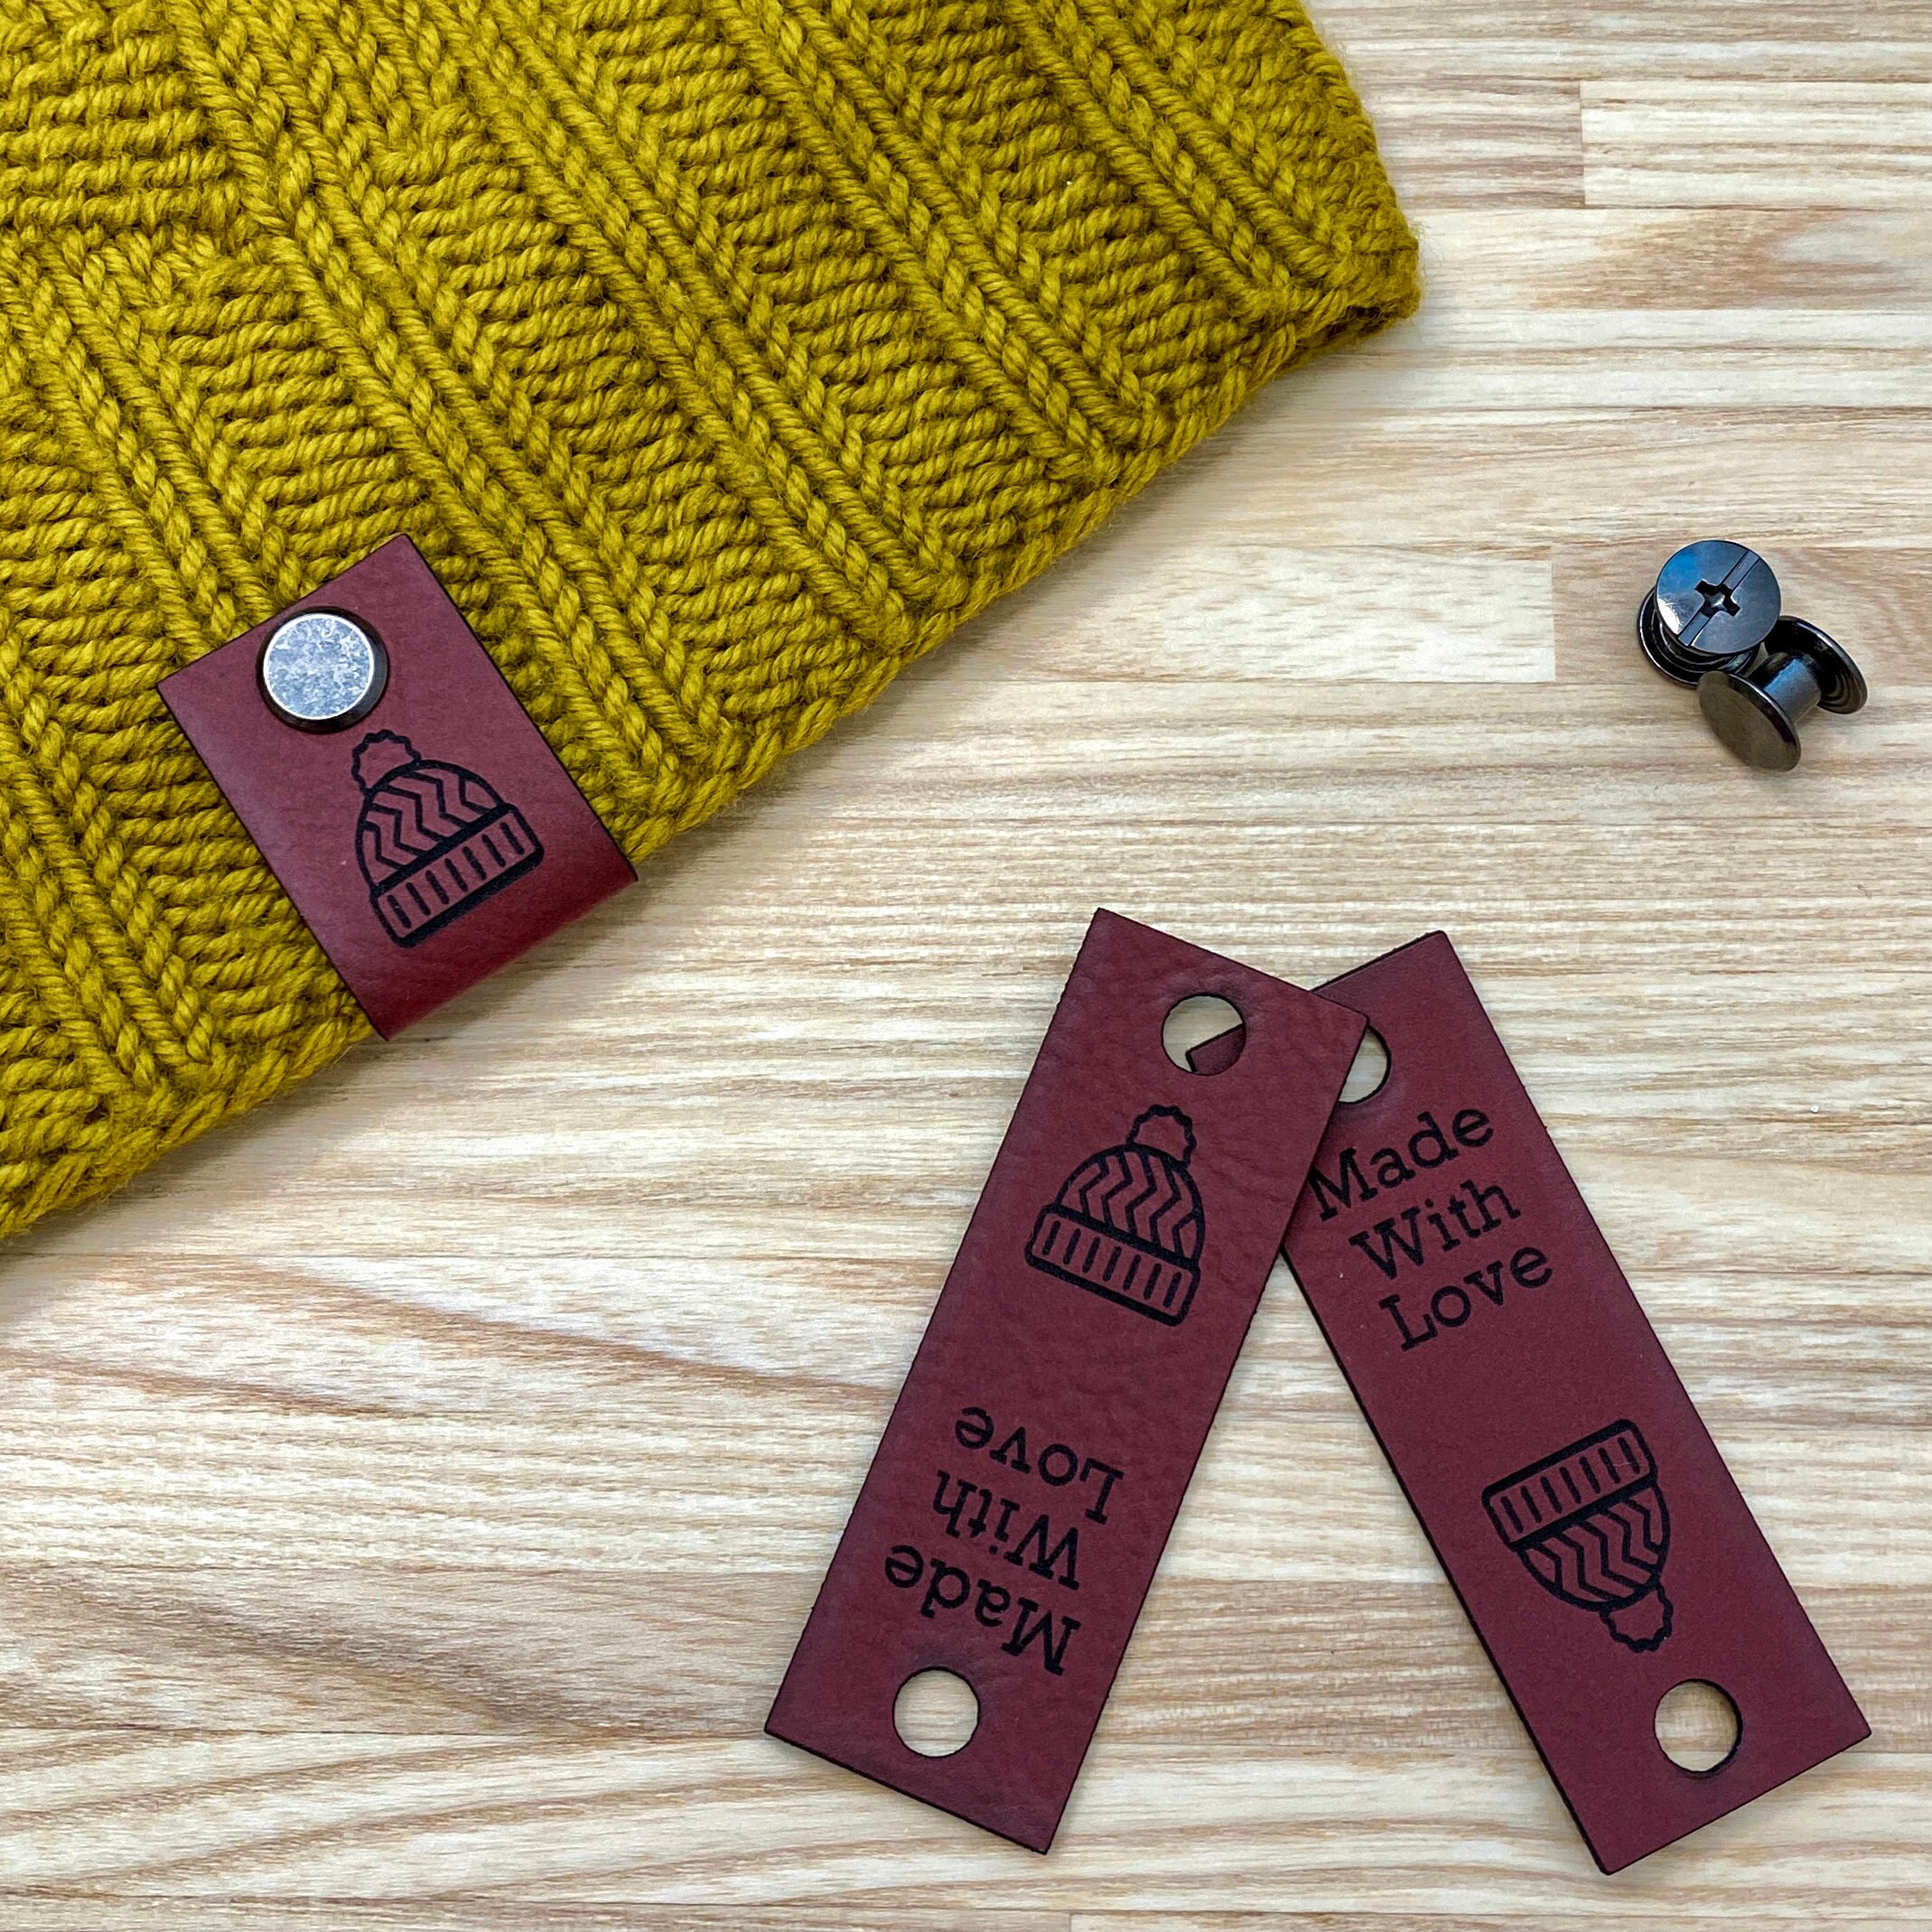 Custom Tags 2.75 X 0.75 Inch for Knits and Crochet, Faux Leather